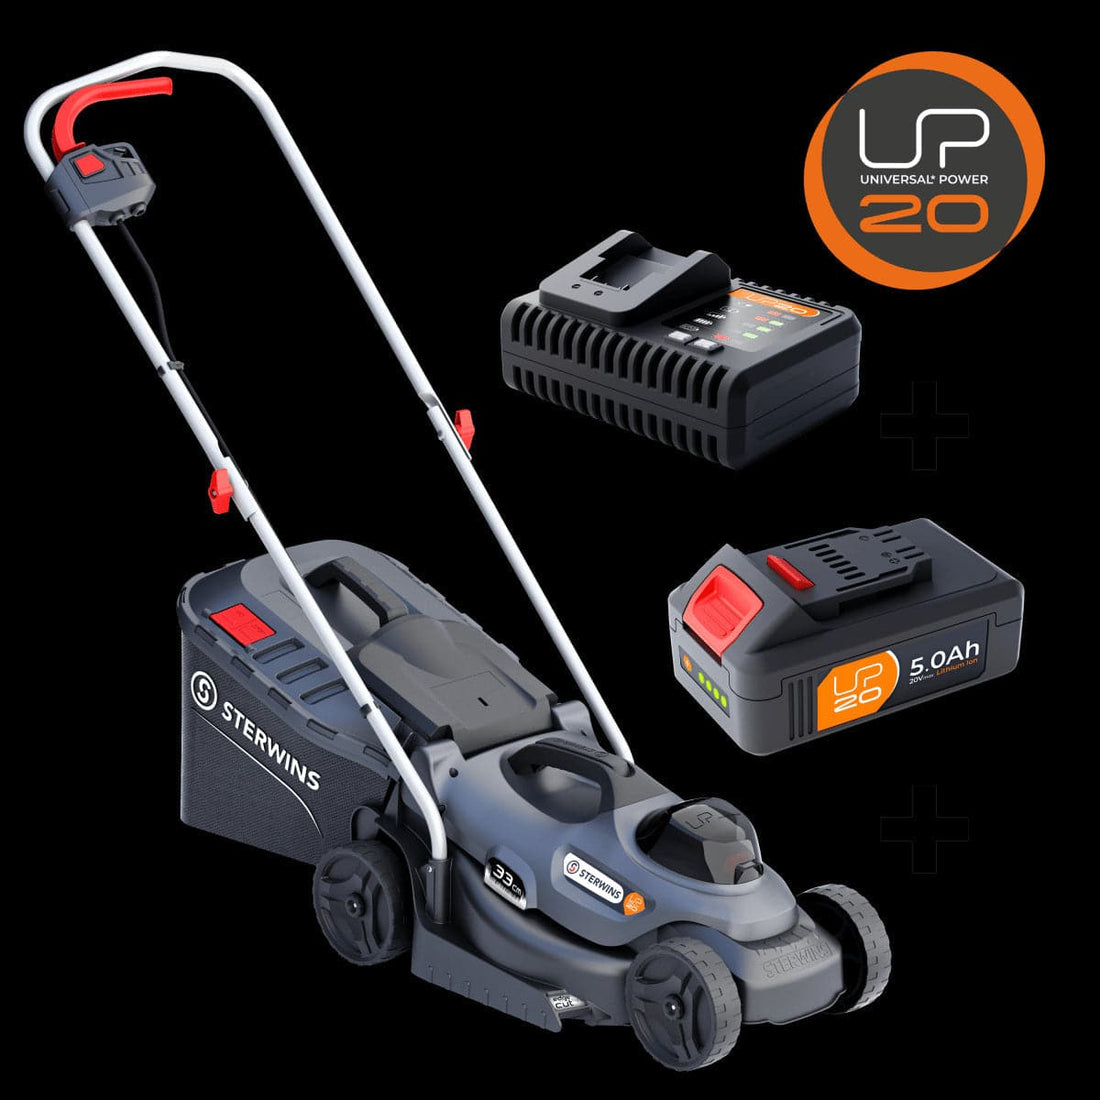 STERWINS 20V CORDLESS MOWER WITH BATTERY AND CHARGER INCLUDED - best price from Maltashopper.com BR500012747